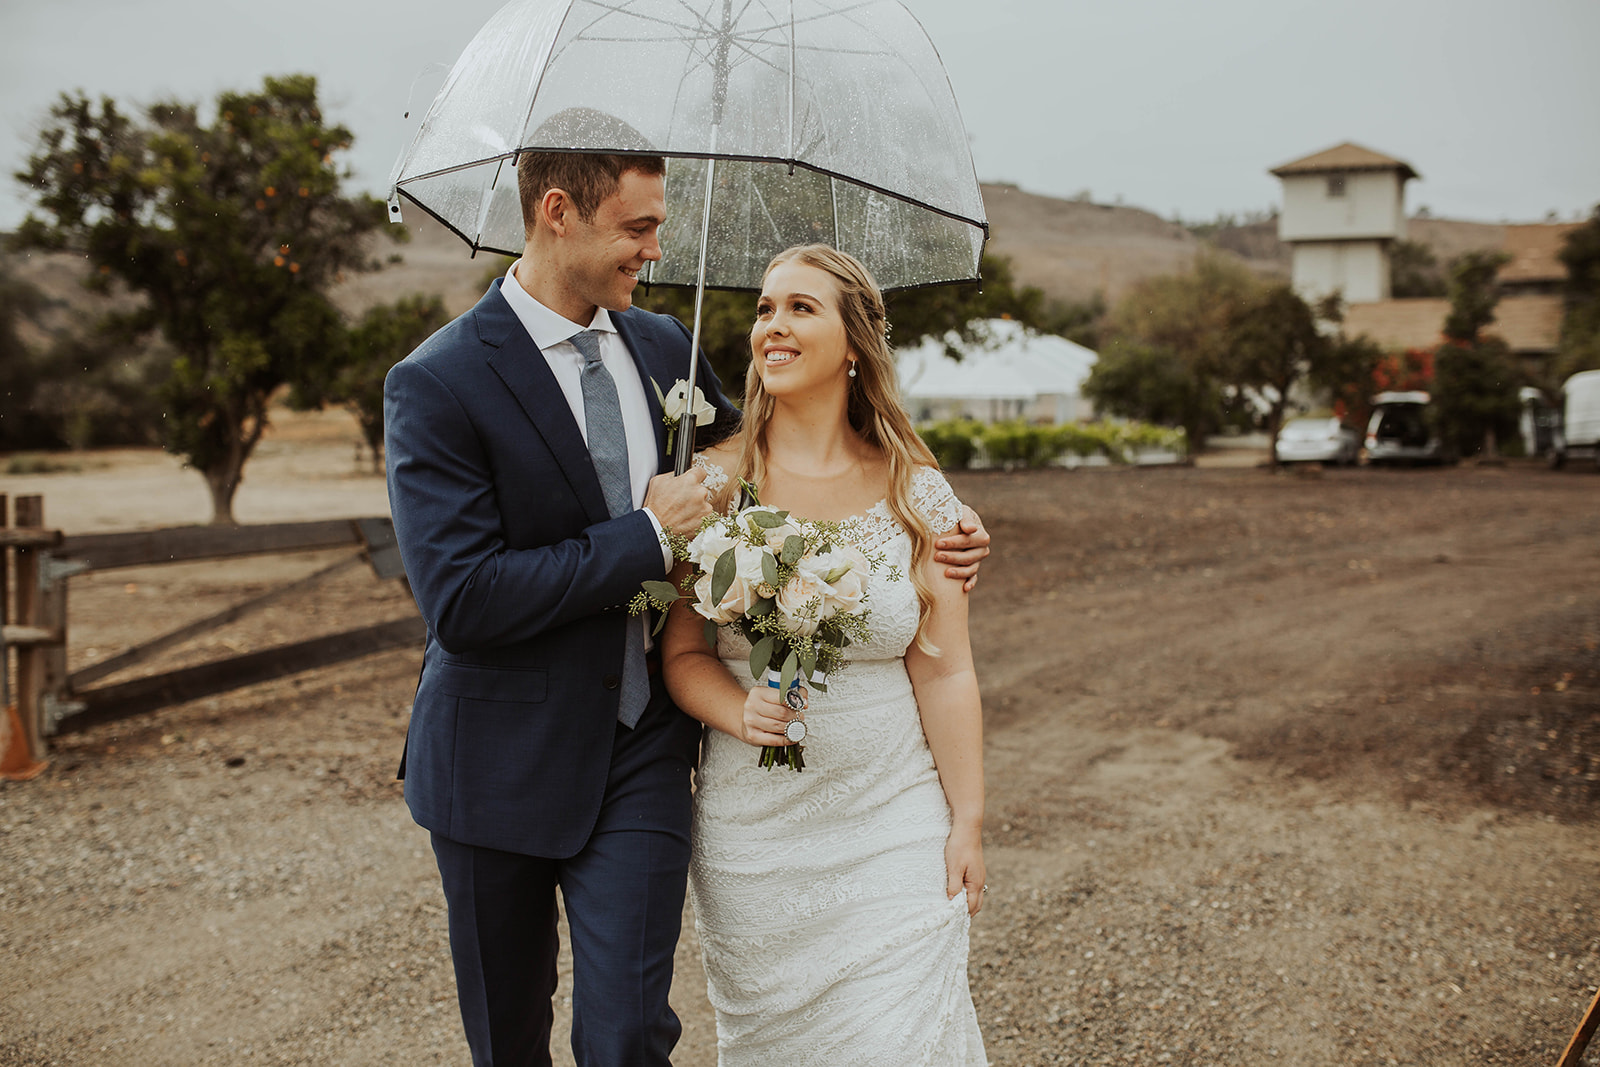 couple gets married at rainy outdoor wedding